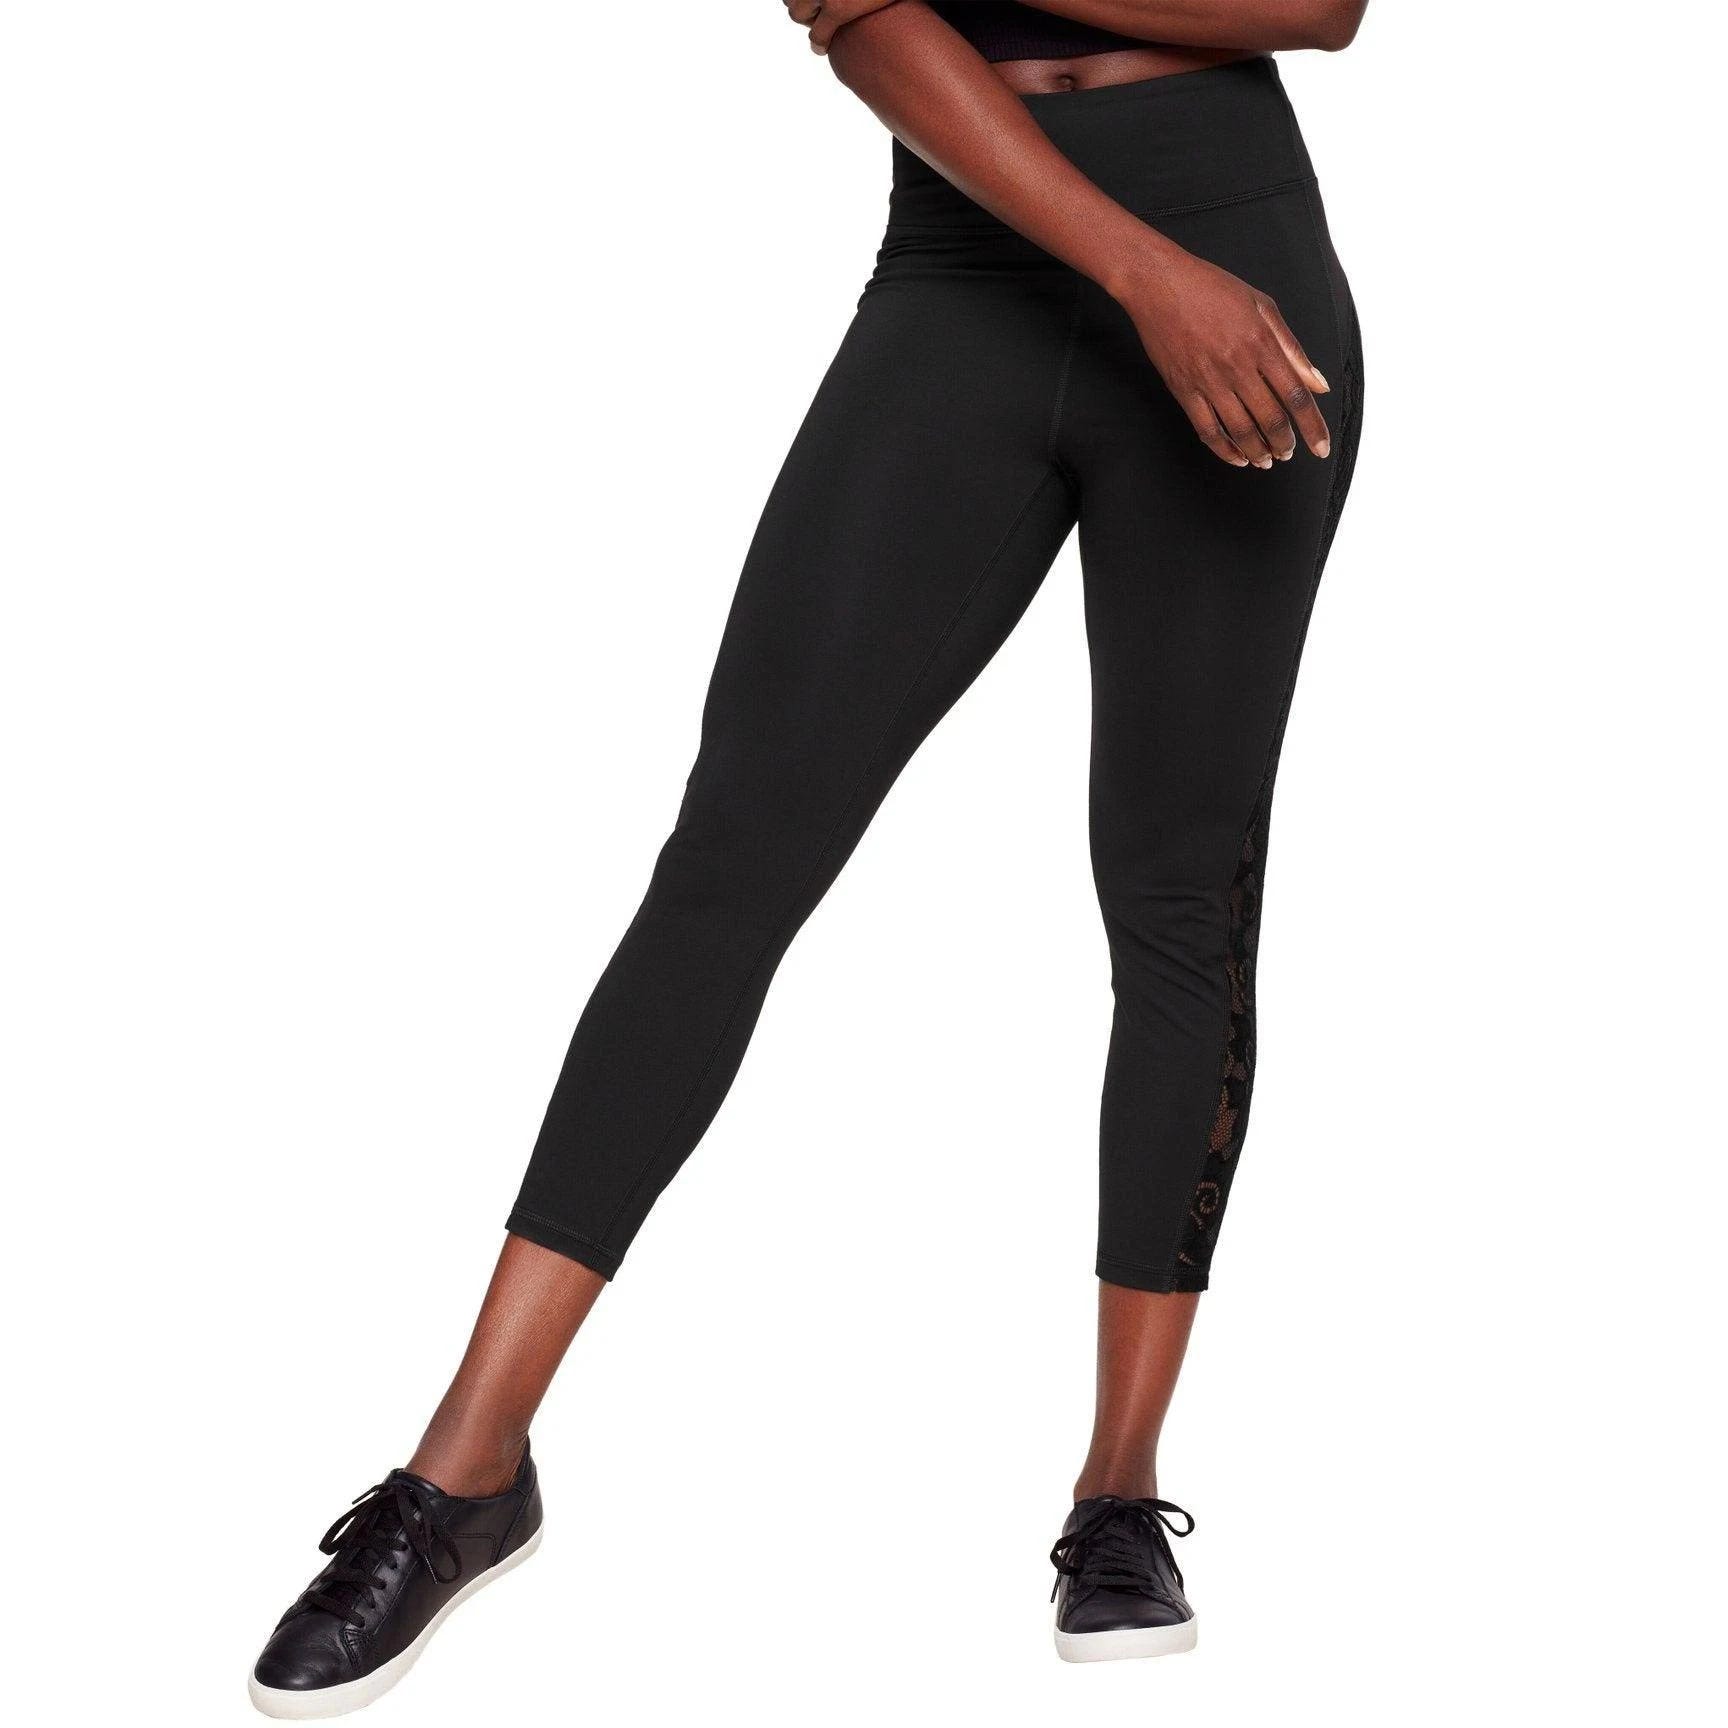 Adore Me: Lace Leggings for Active Women | Image